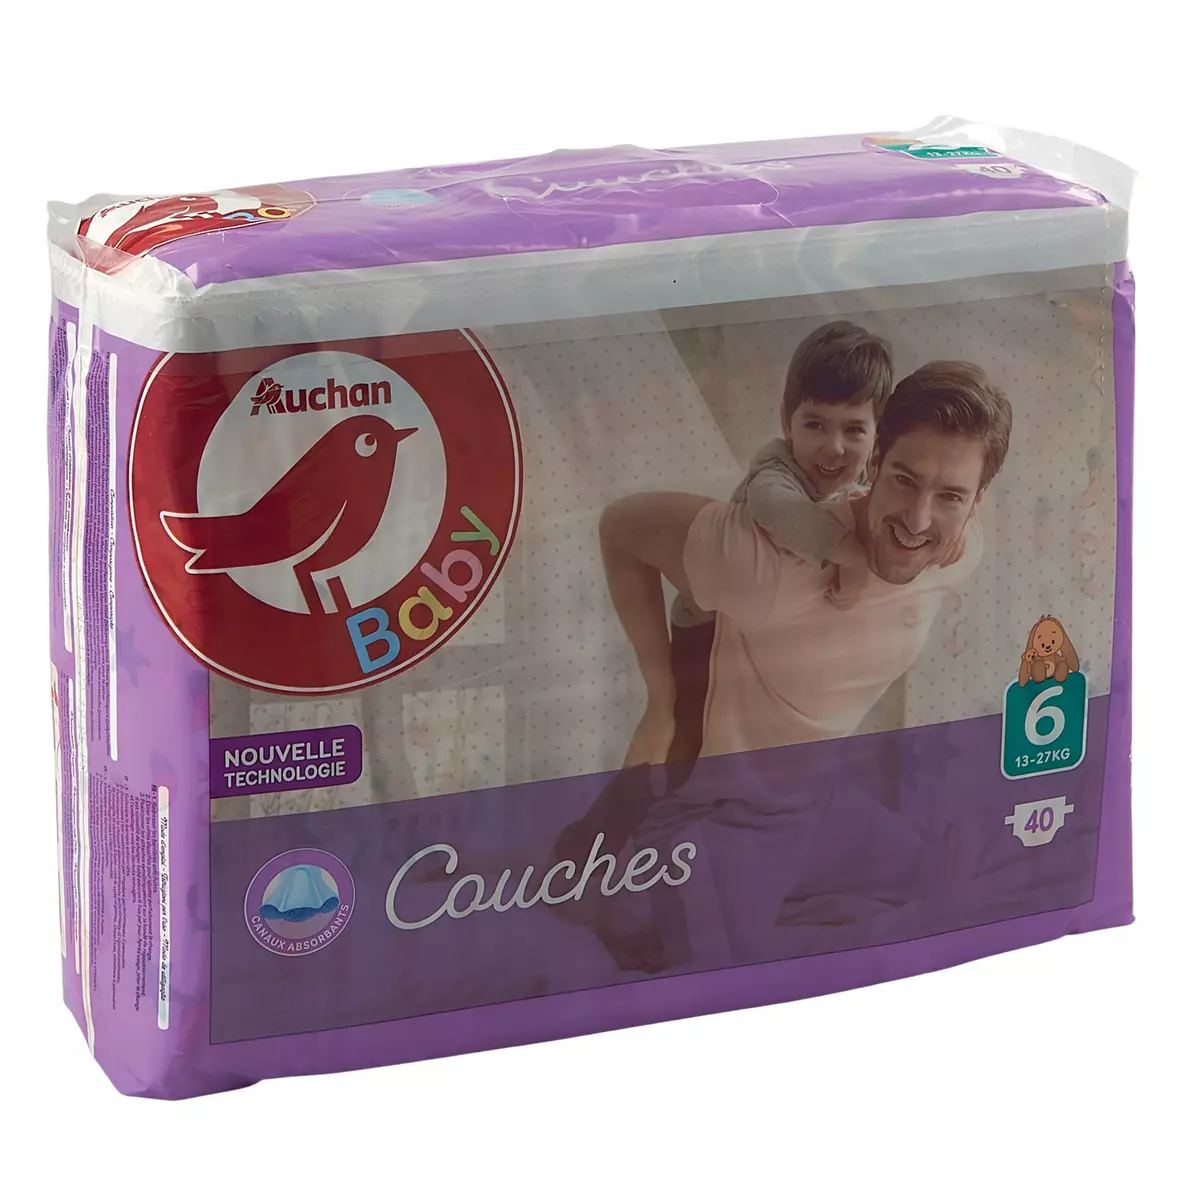 AUCHAN BABY Couches taille 6 (13-27kg) 40 couches pas cher 